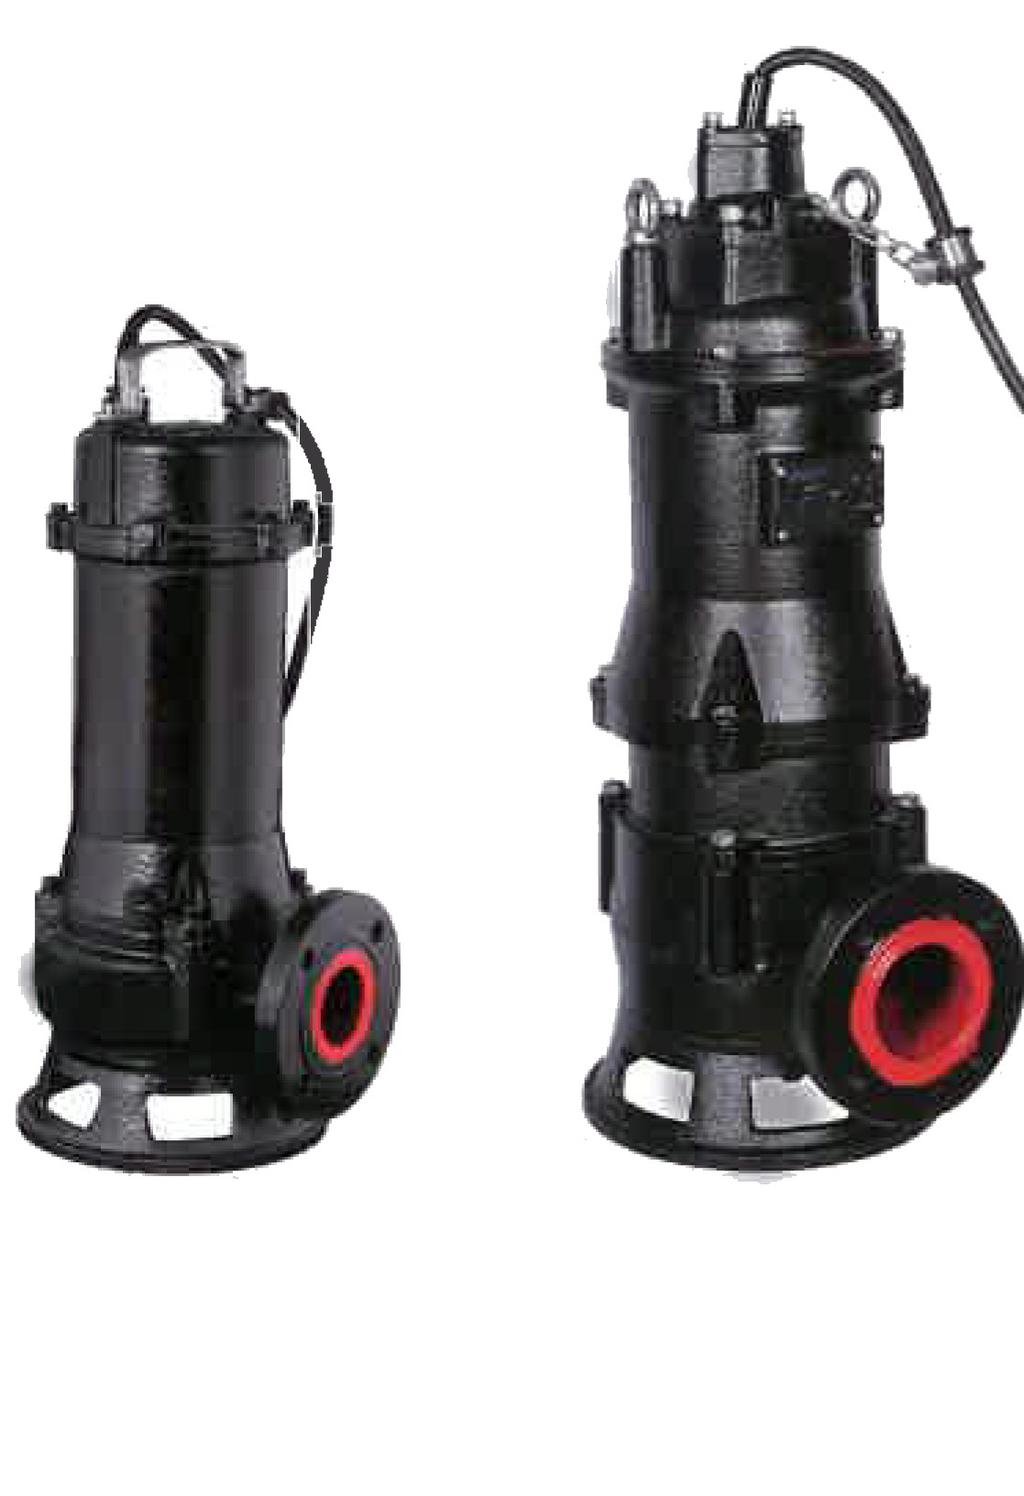 C-SERIES RAW SEWAGE PUMP DESIGN The C Range of raw sewage / sludge pumps feature an adjustable bottom plate to maintain efficiency by maintaining the preferred clearance in relation to the